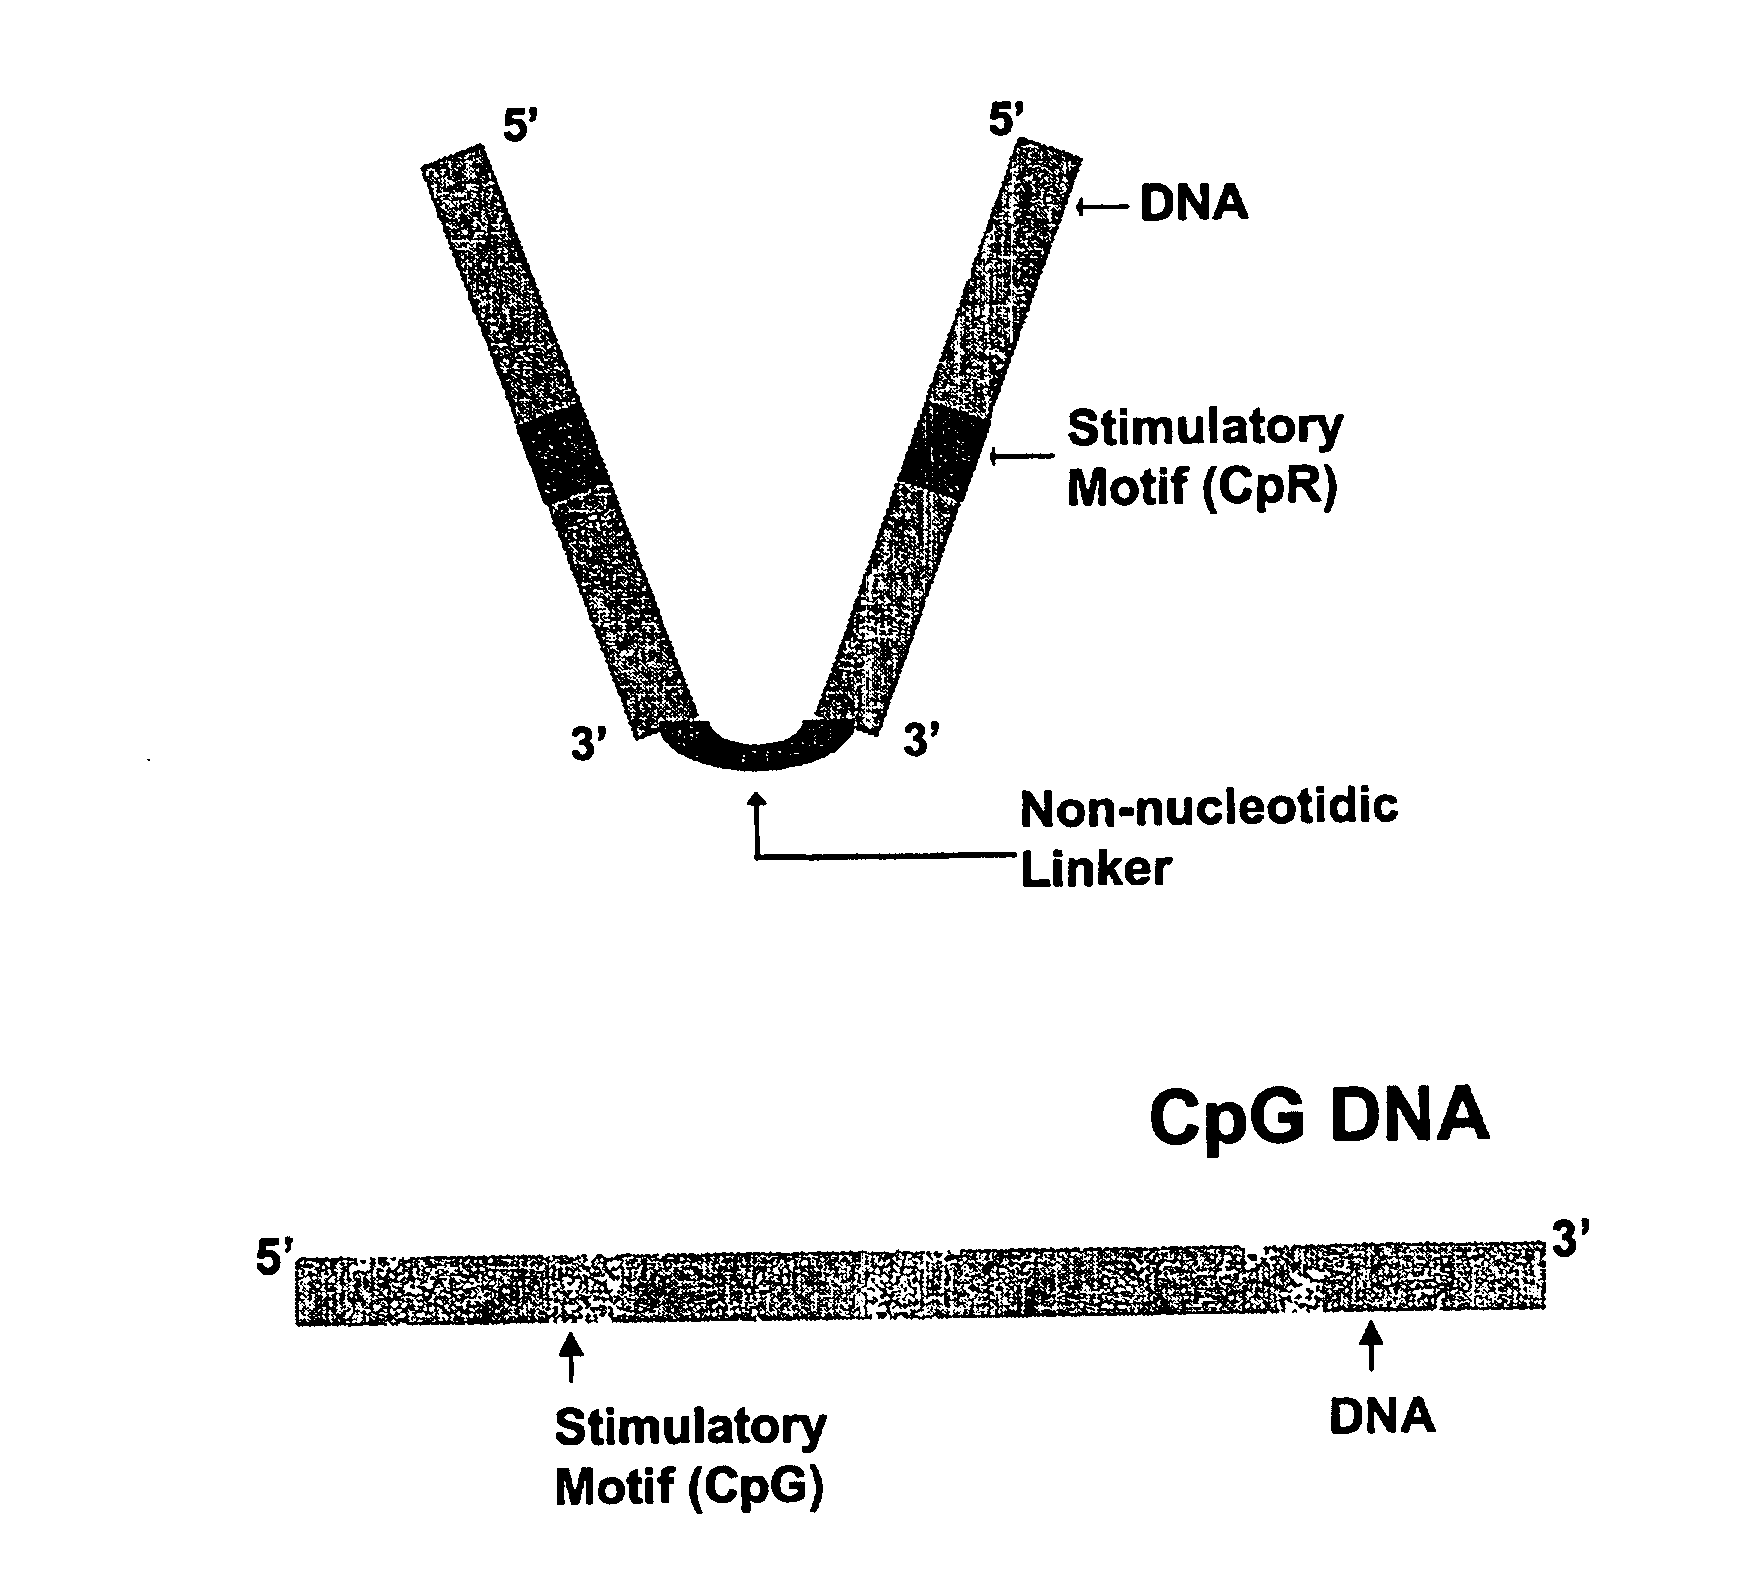 Immunogenic Hiv Compositions and Related Methods